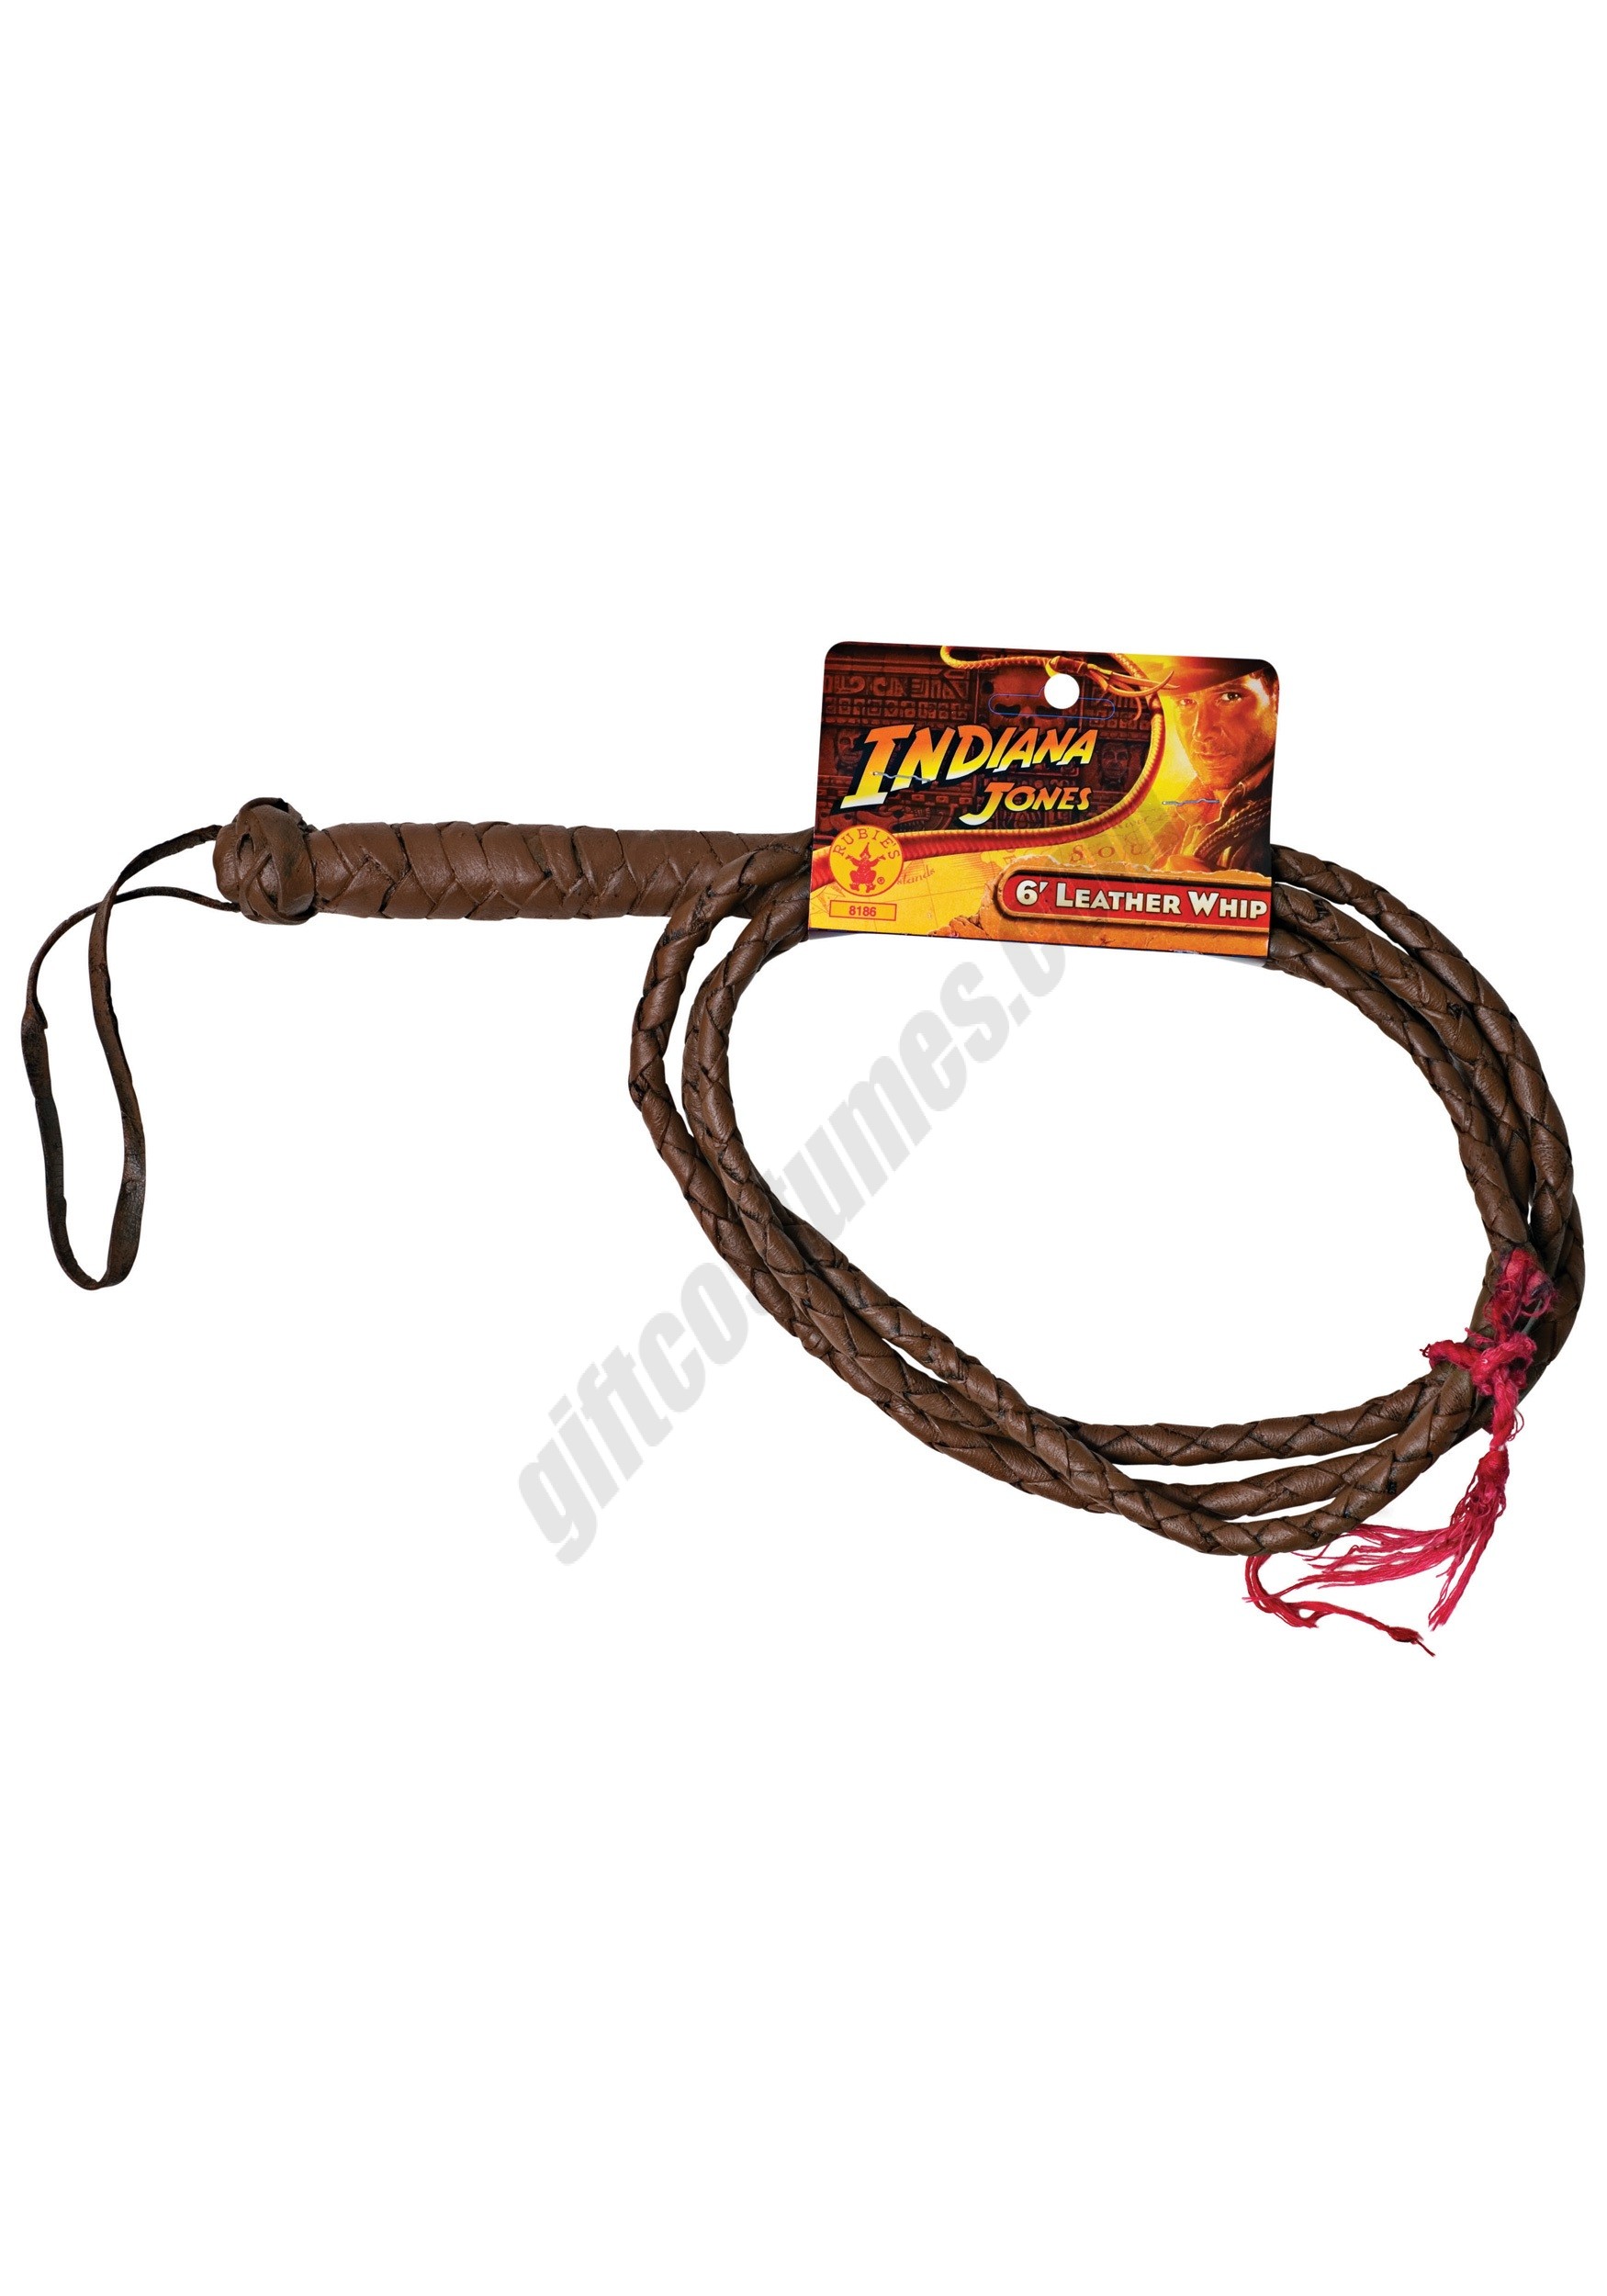 Leather Indiana Jones 6ft Whip Promotions - Leather Indiana Jones 6ft Whip Promotions